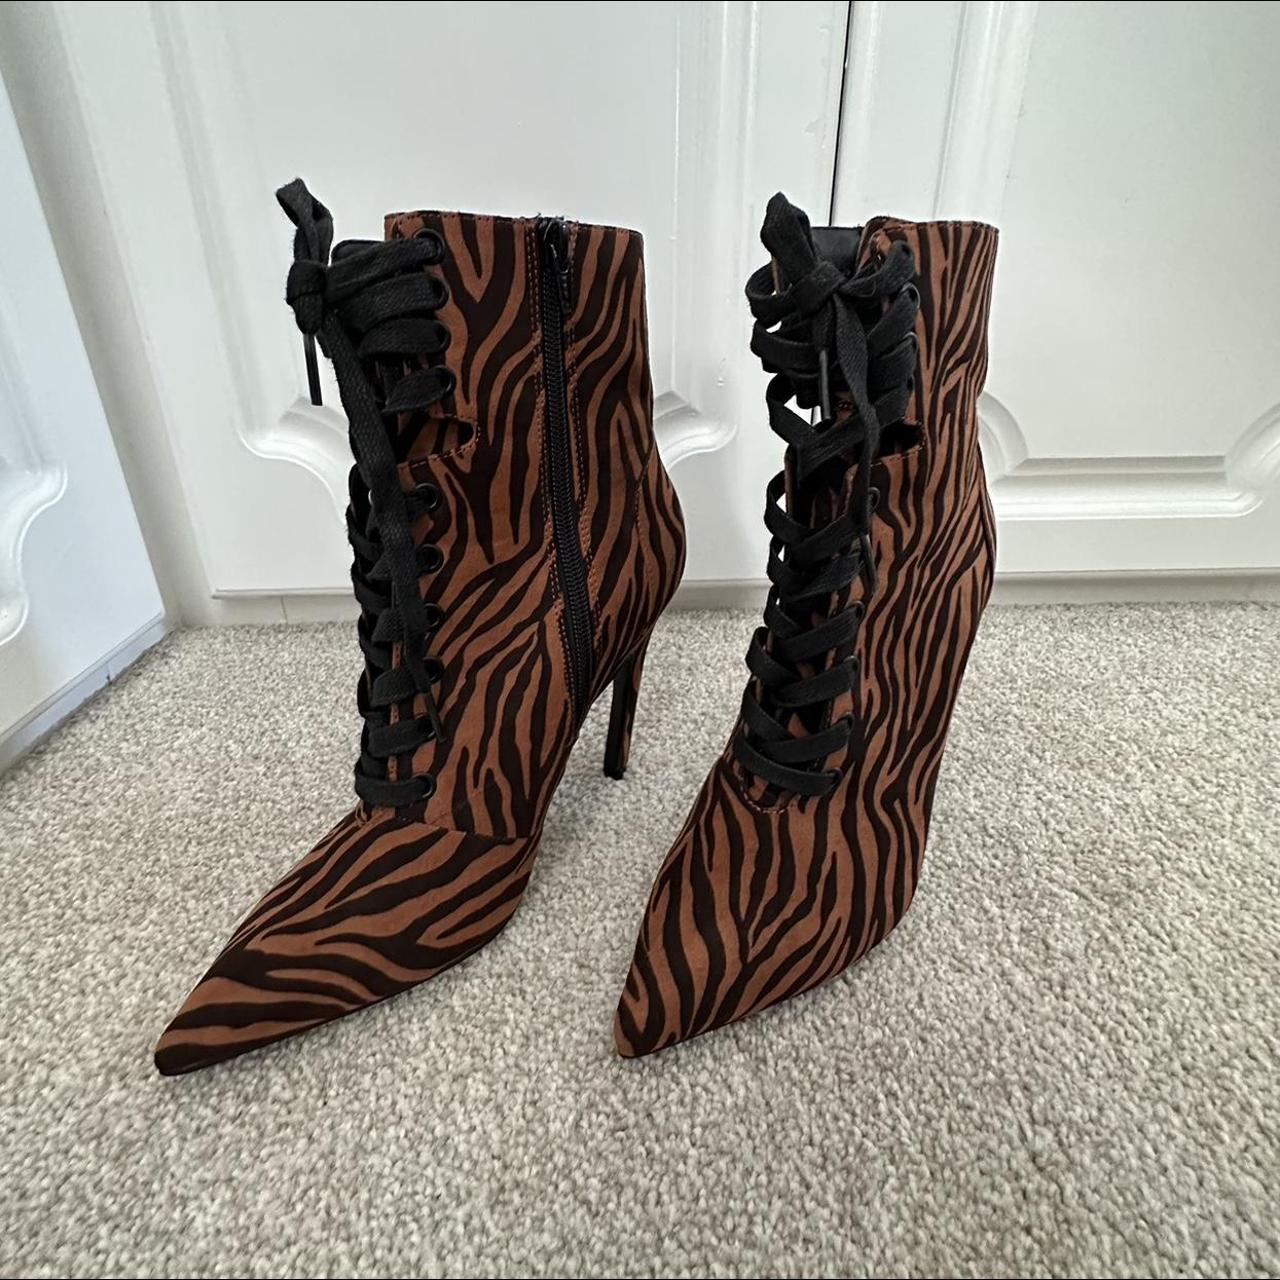 ASOS Women's Black and Brown Courts | Depop